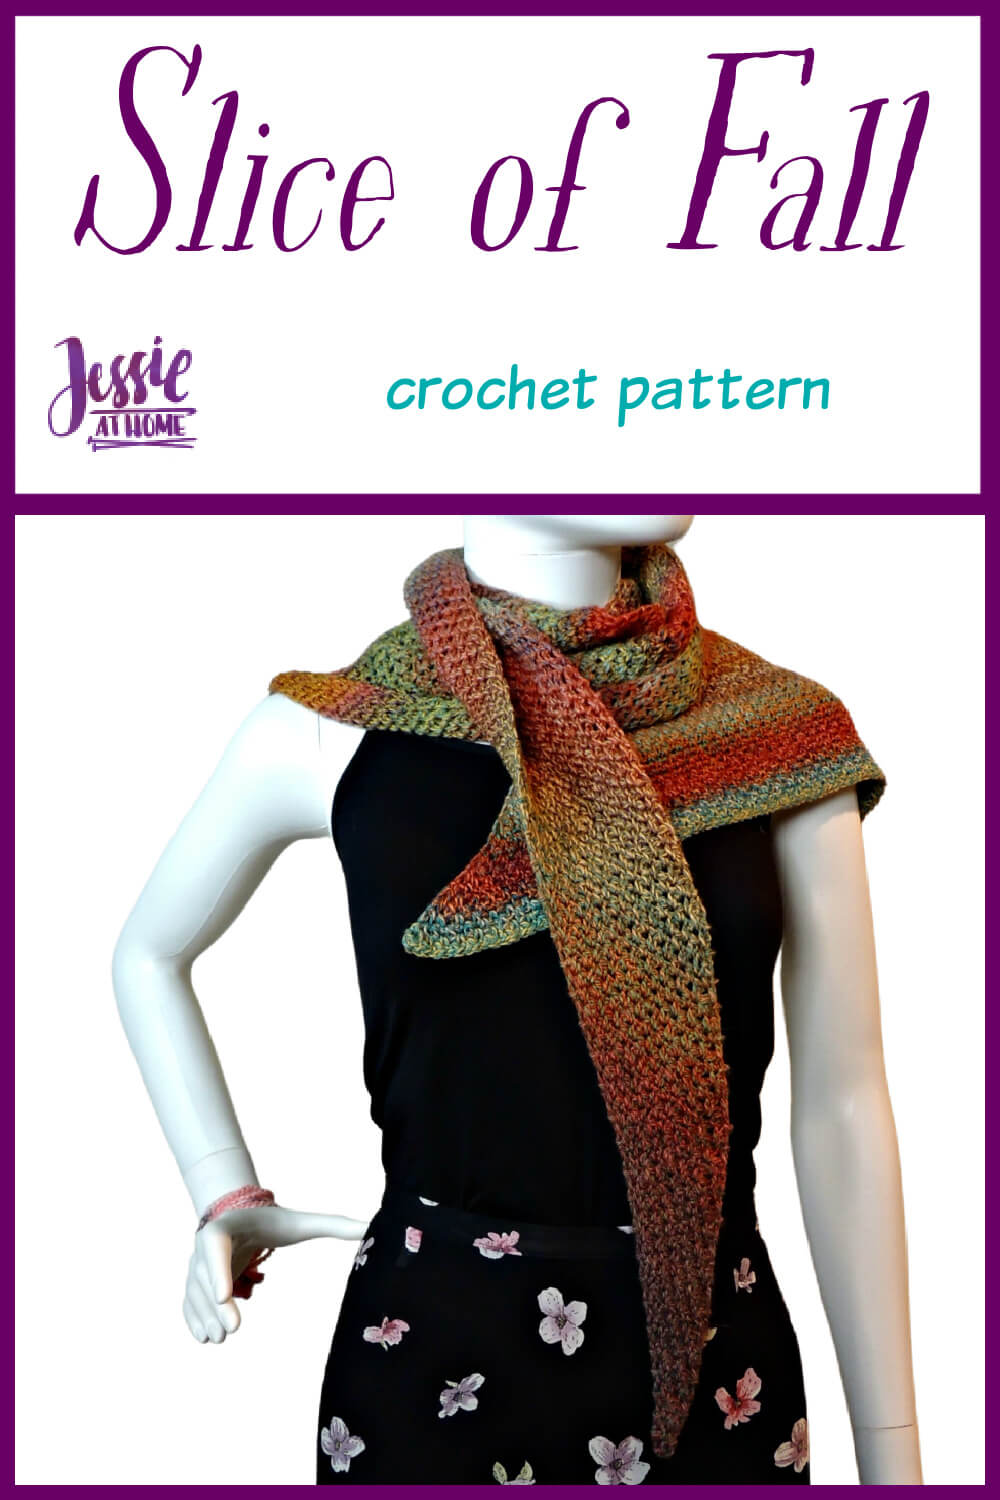 Slice of Fall Wrap - crochet pattern by Jessie At Home - Pin 1